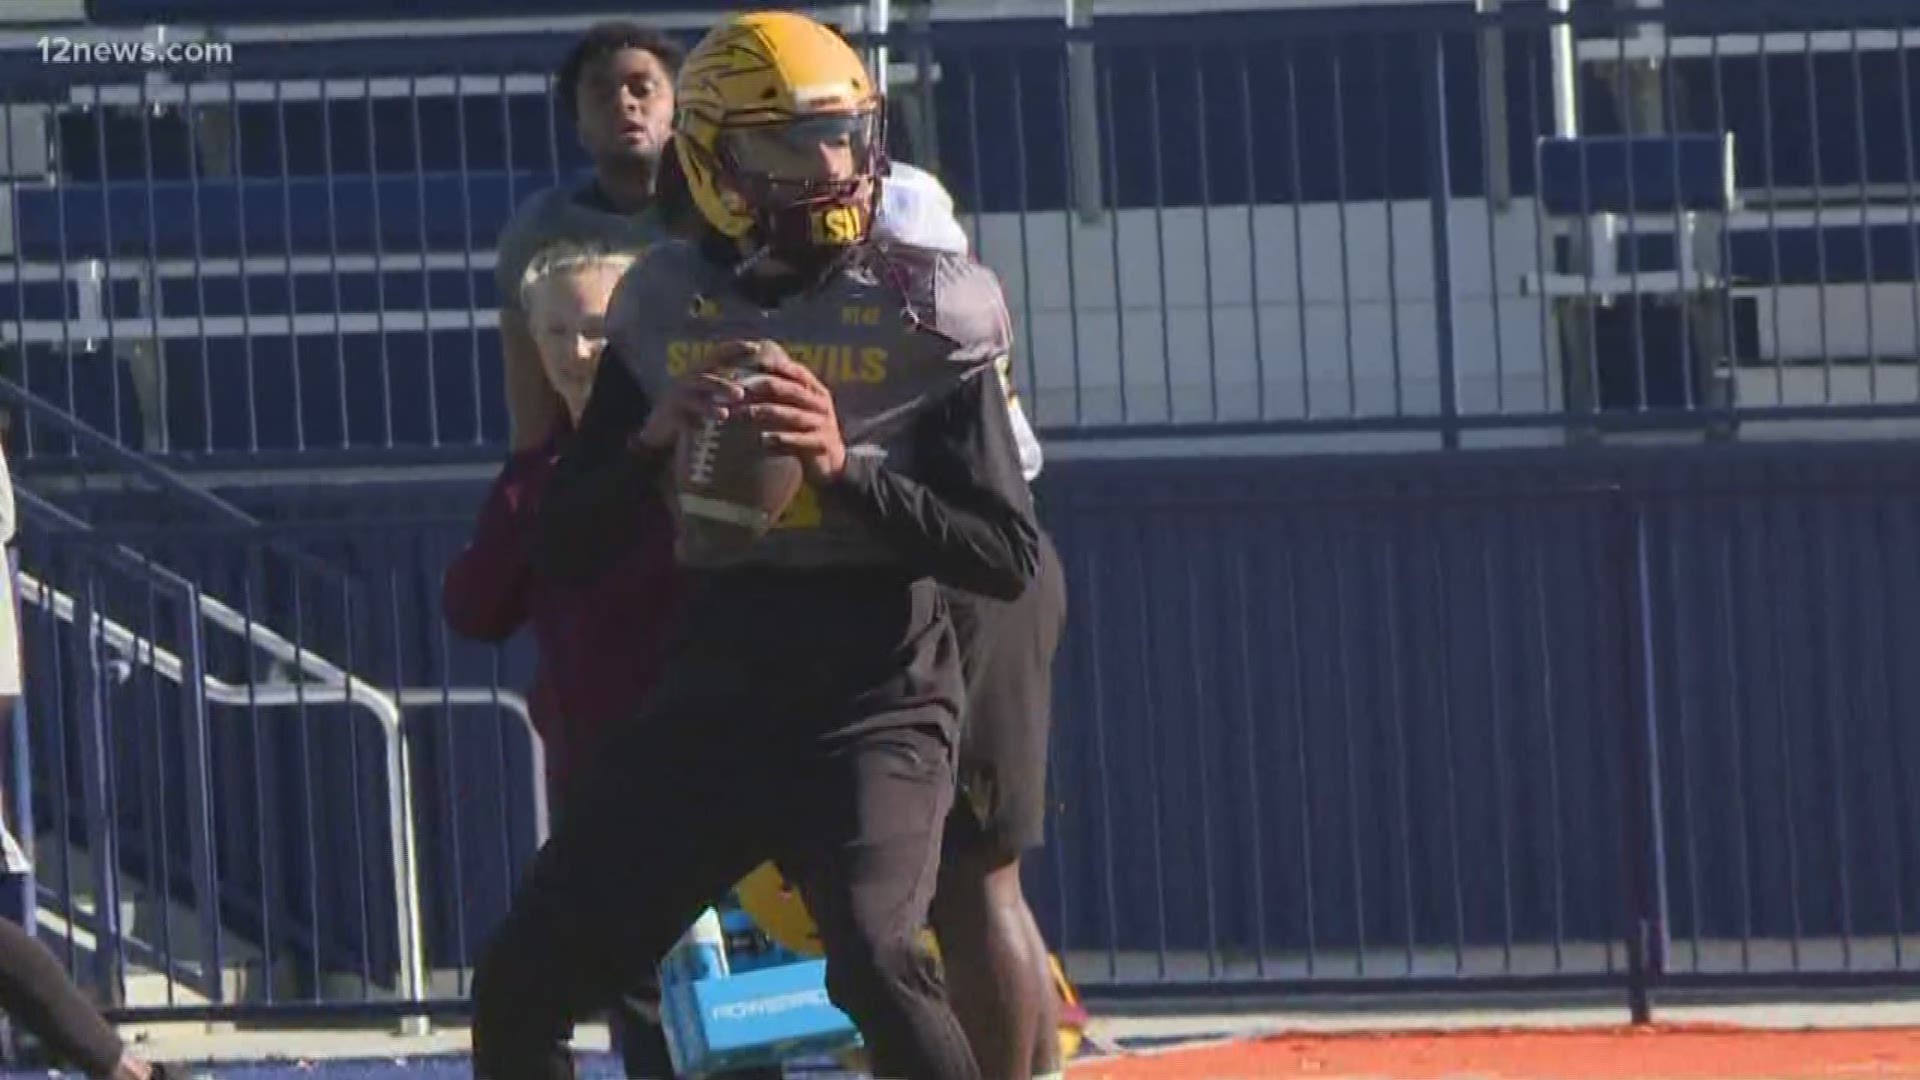 Herm Edwards is having the time of his life this week as the Arizona State Sun Devils prep for the Las Vegas Bowl this weekend. We show you why Herm is the talk of Las Vegas.